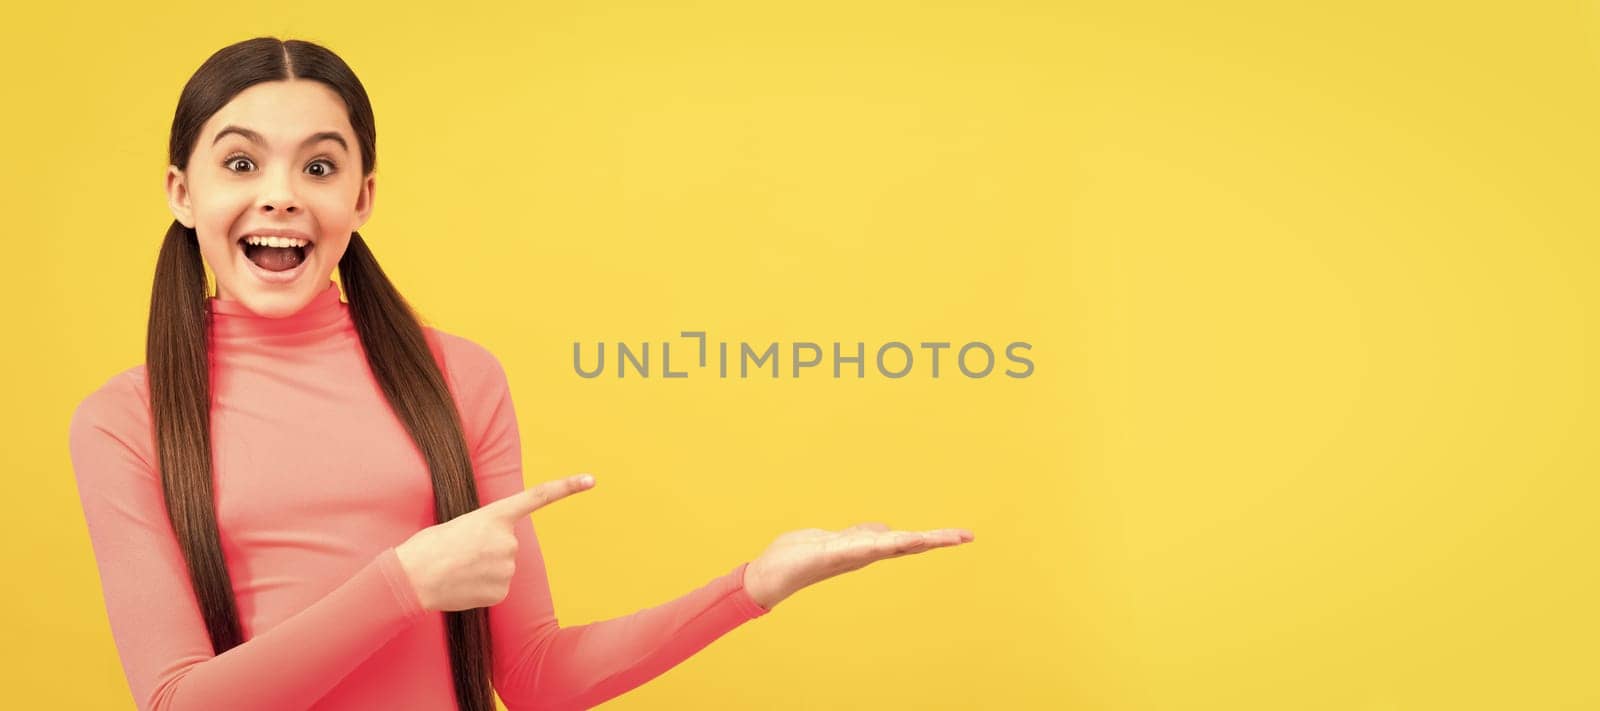 amazed kid pointing finger on copy space on yellow background, shopping sale. Child face, horizontal poster, teenager girl isolated portrait, banner with copy space